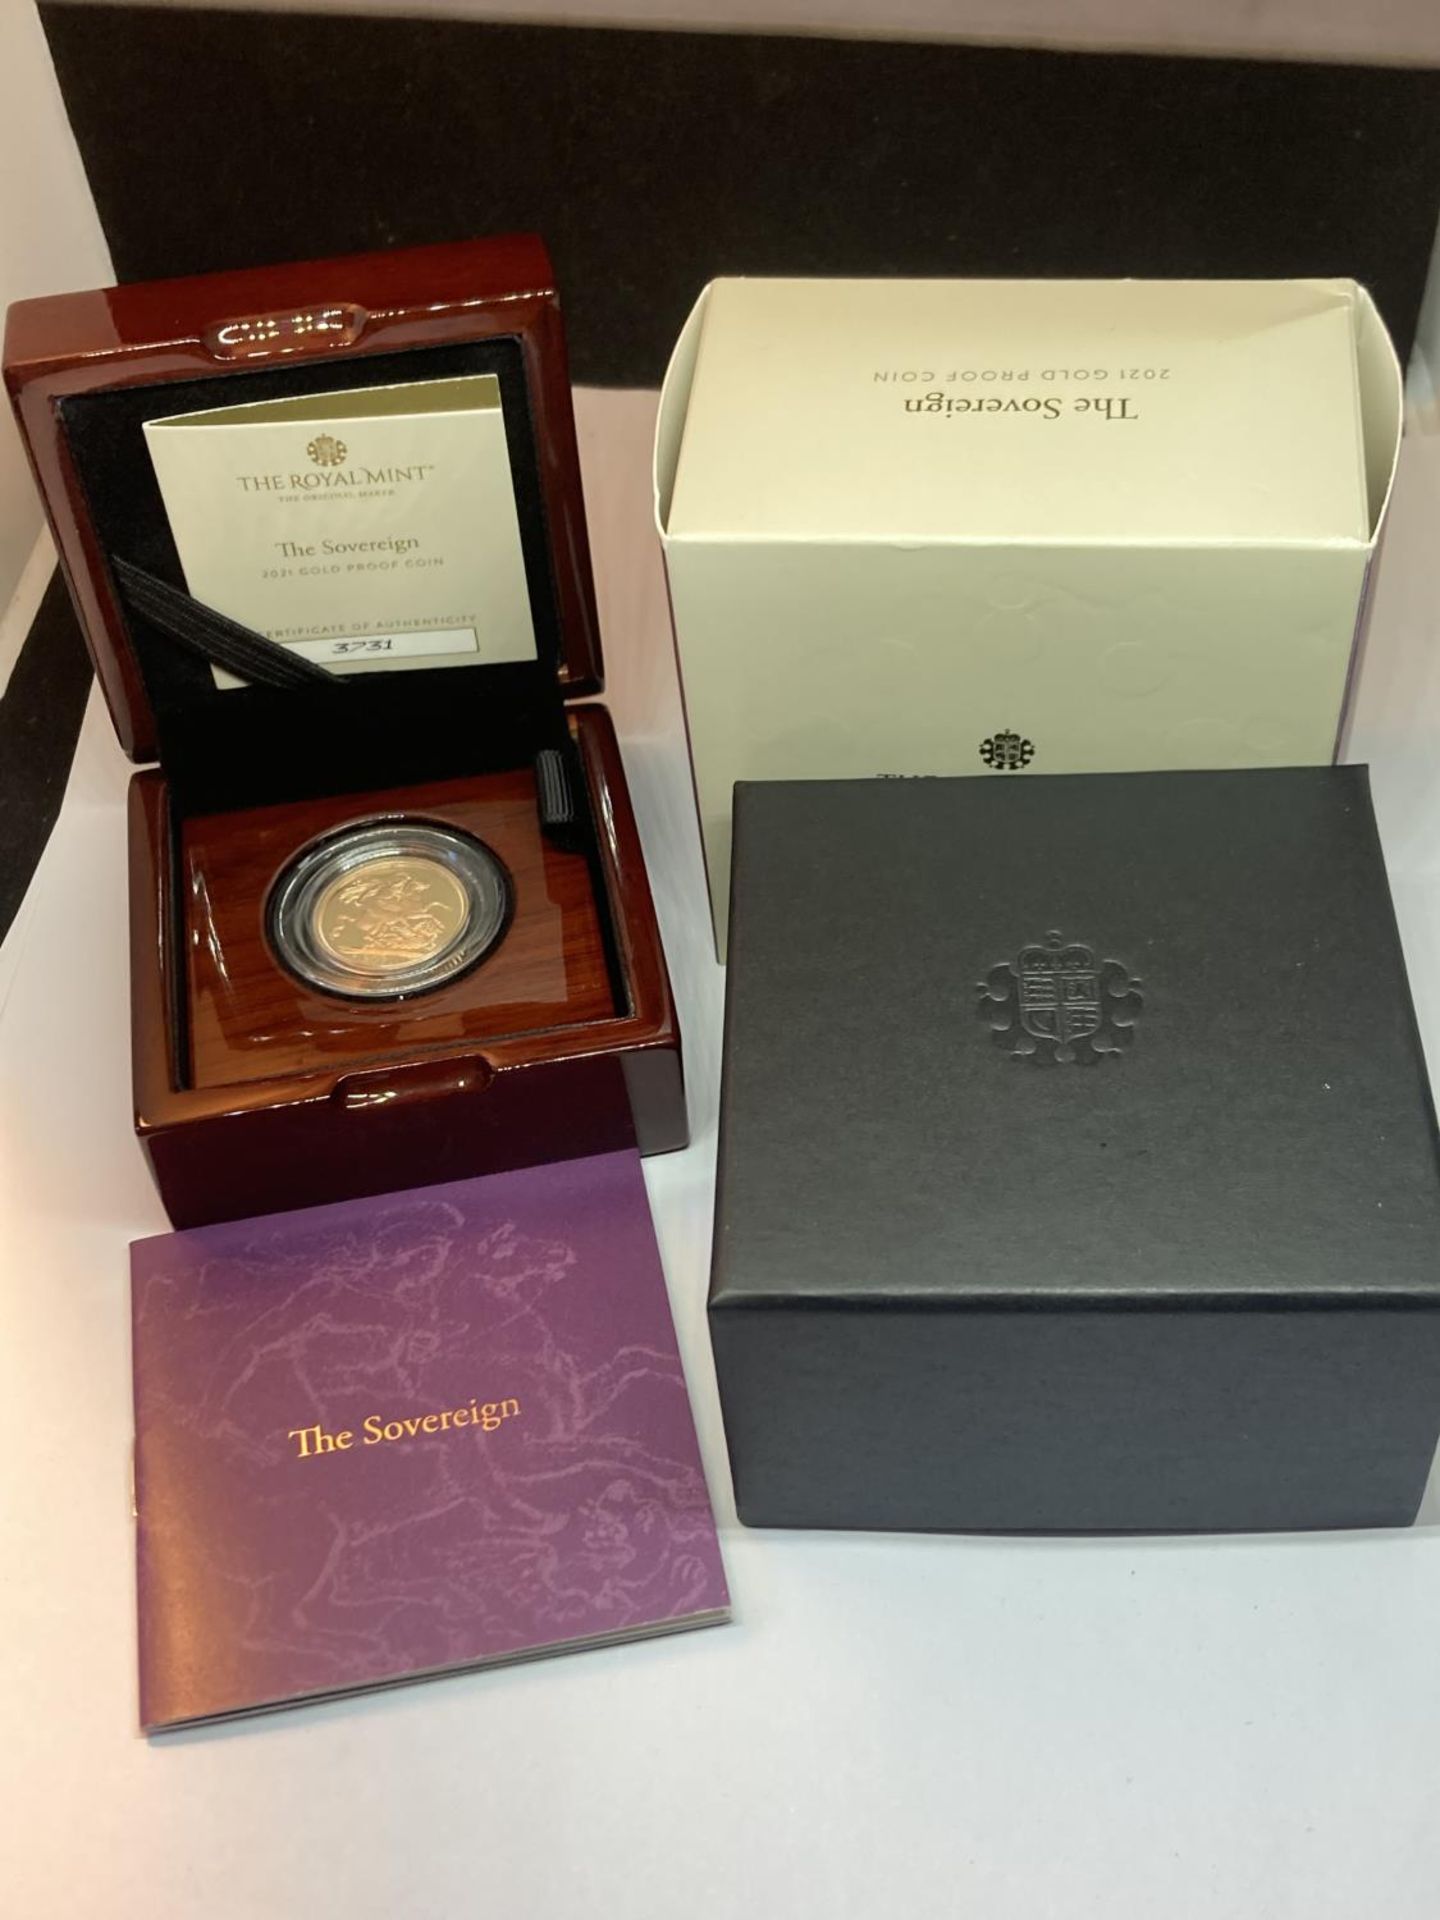 A 2021 THE SOVEREIGN GOLD PROOF LIMITED EDITION NUMBER 3,731 OF 7,995 IN A WOODEN BOXED CASE